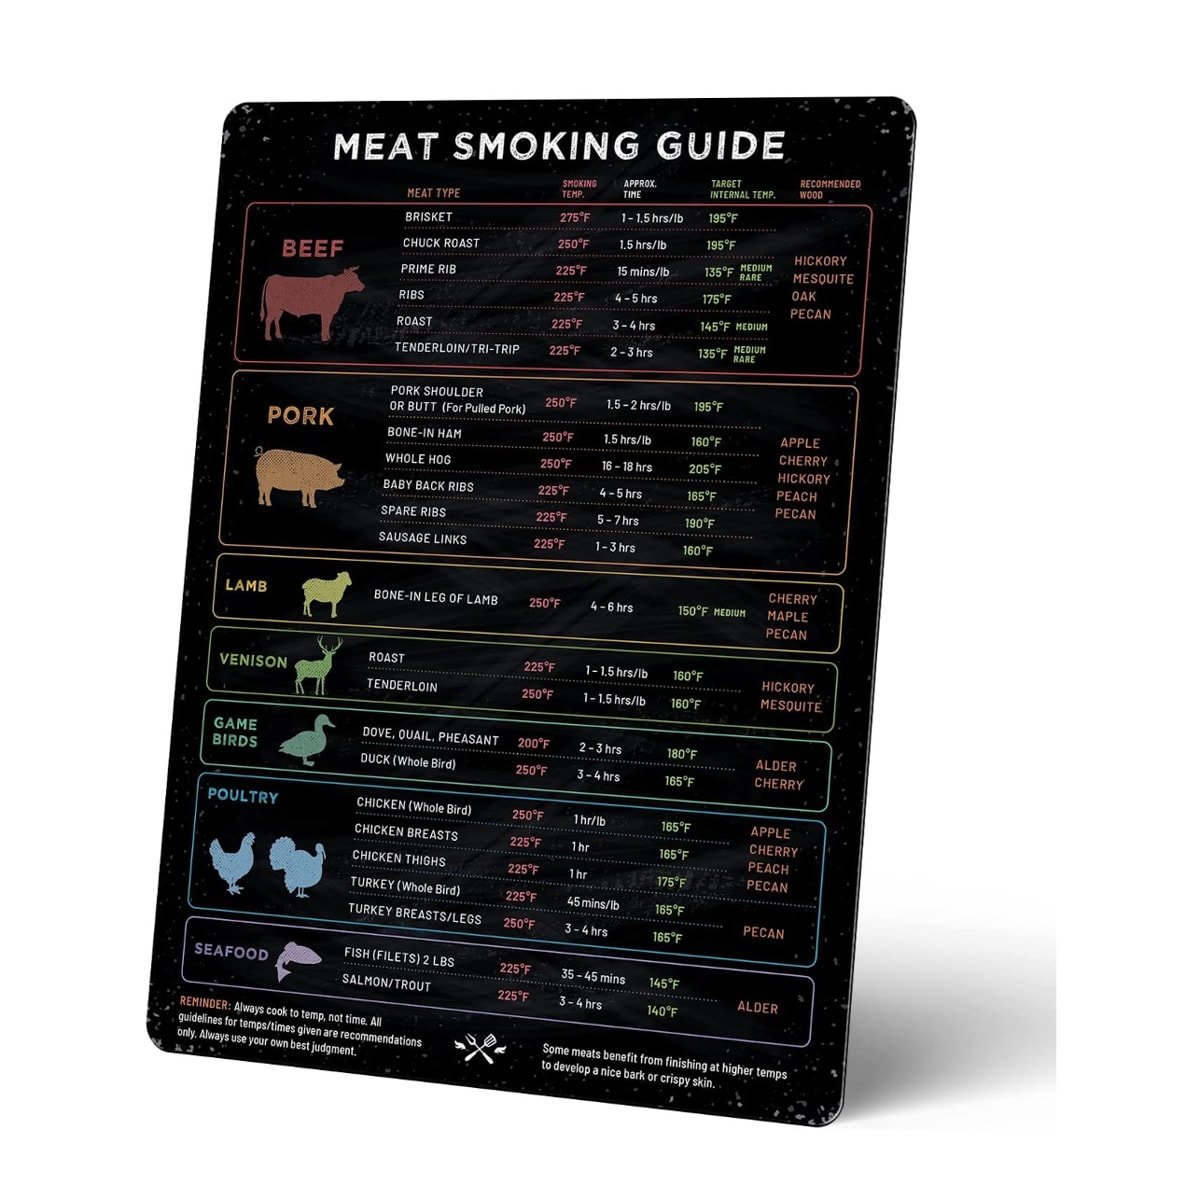 A magnetic chart that shows smoking temperatures and cook times for various types of meat.